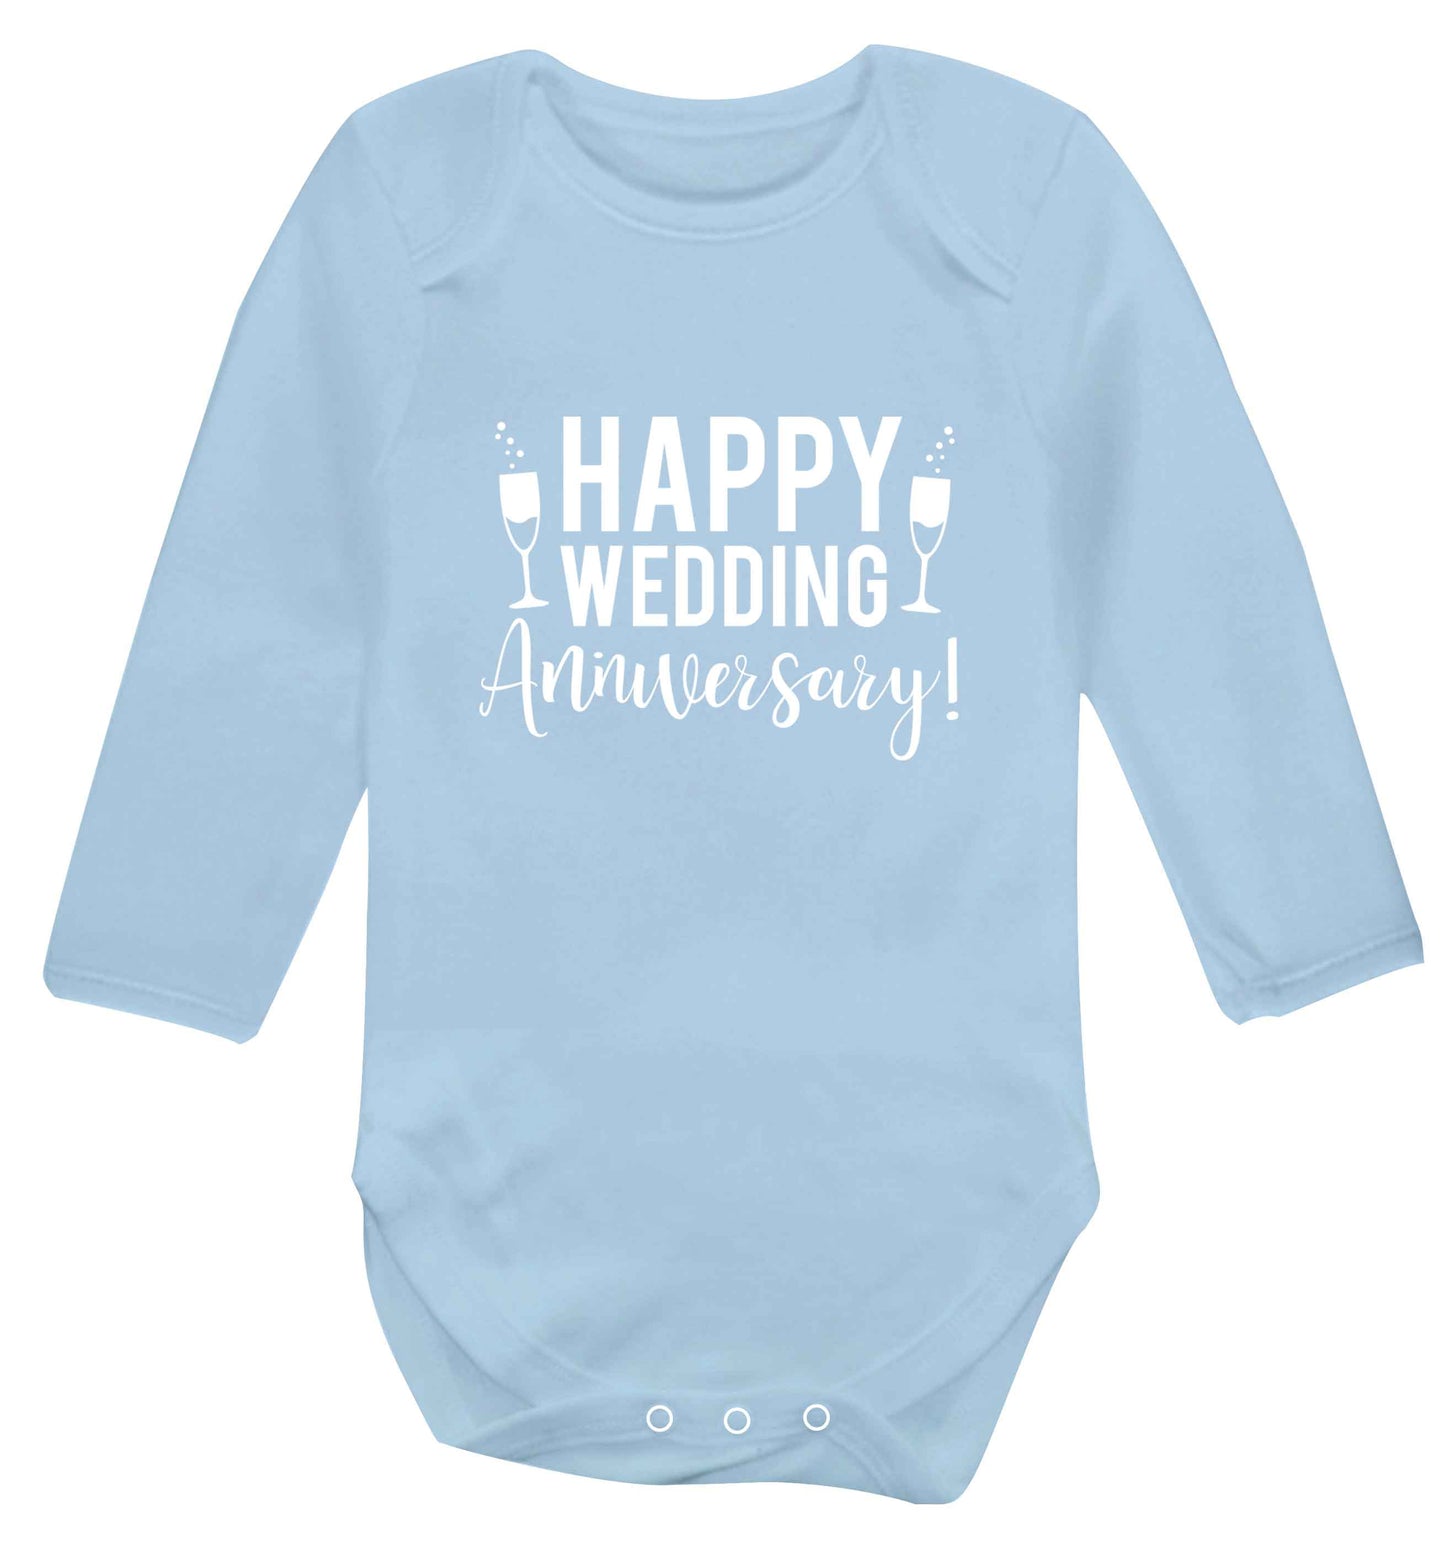 Happy wedding anniversary! baby vest long sleeved pale blue 6-12 months